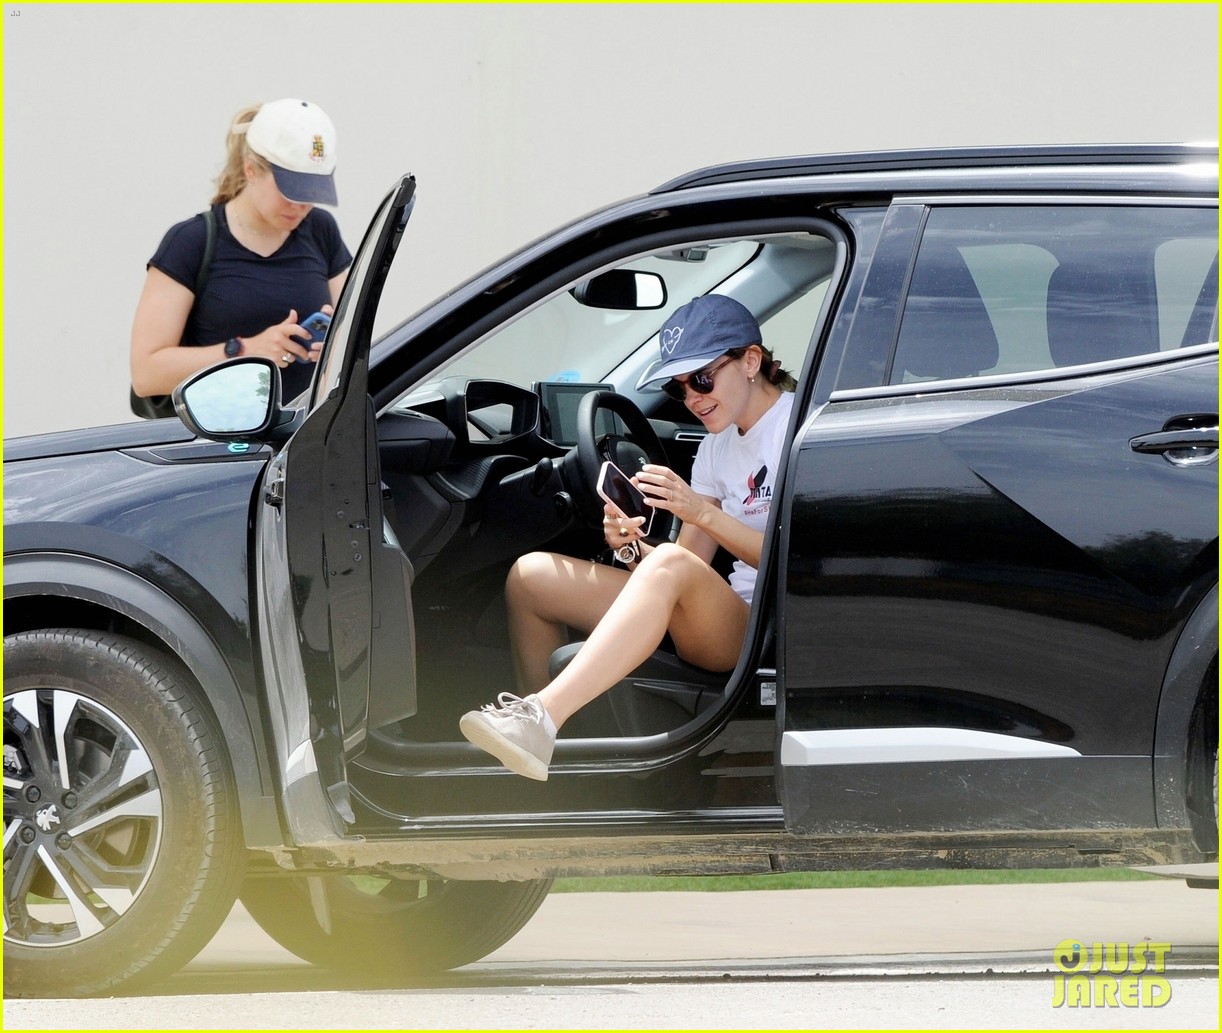 april shapley share emma watson getting out of car photos